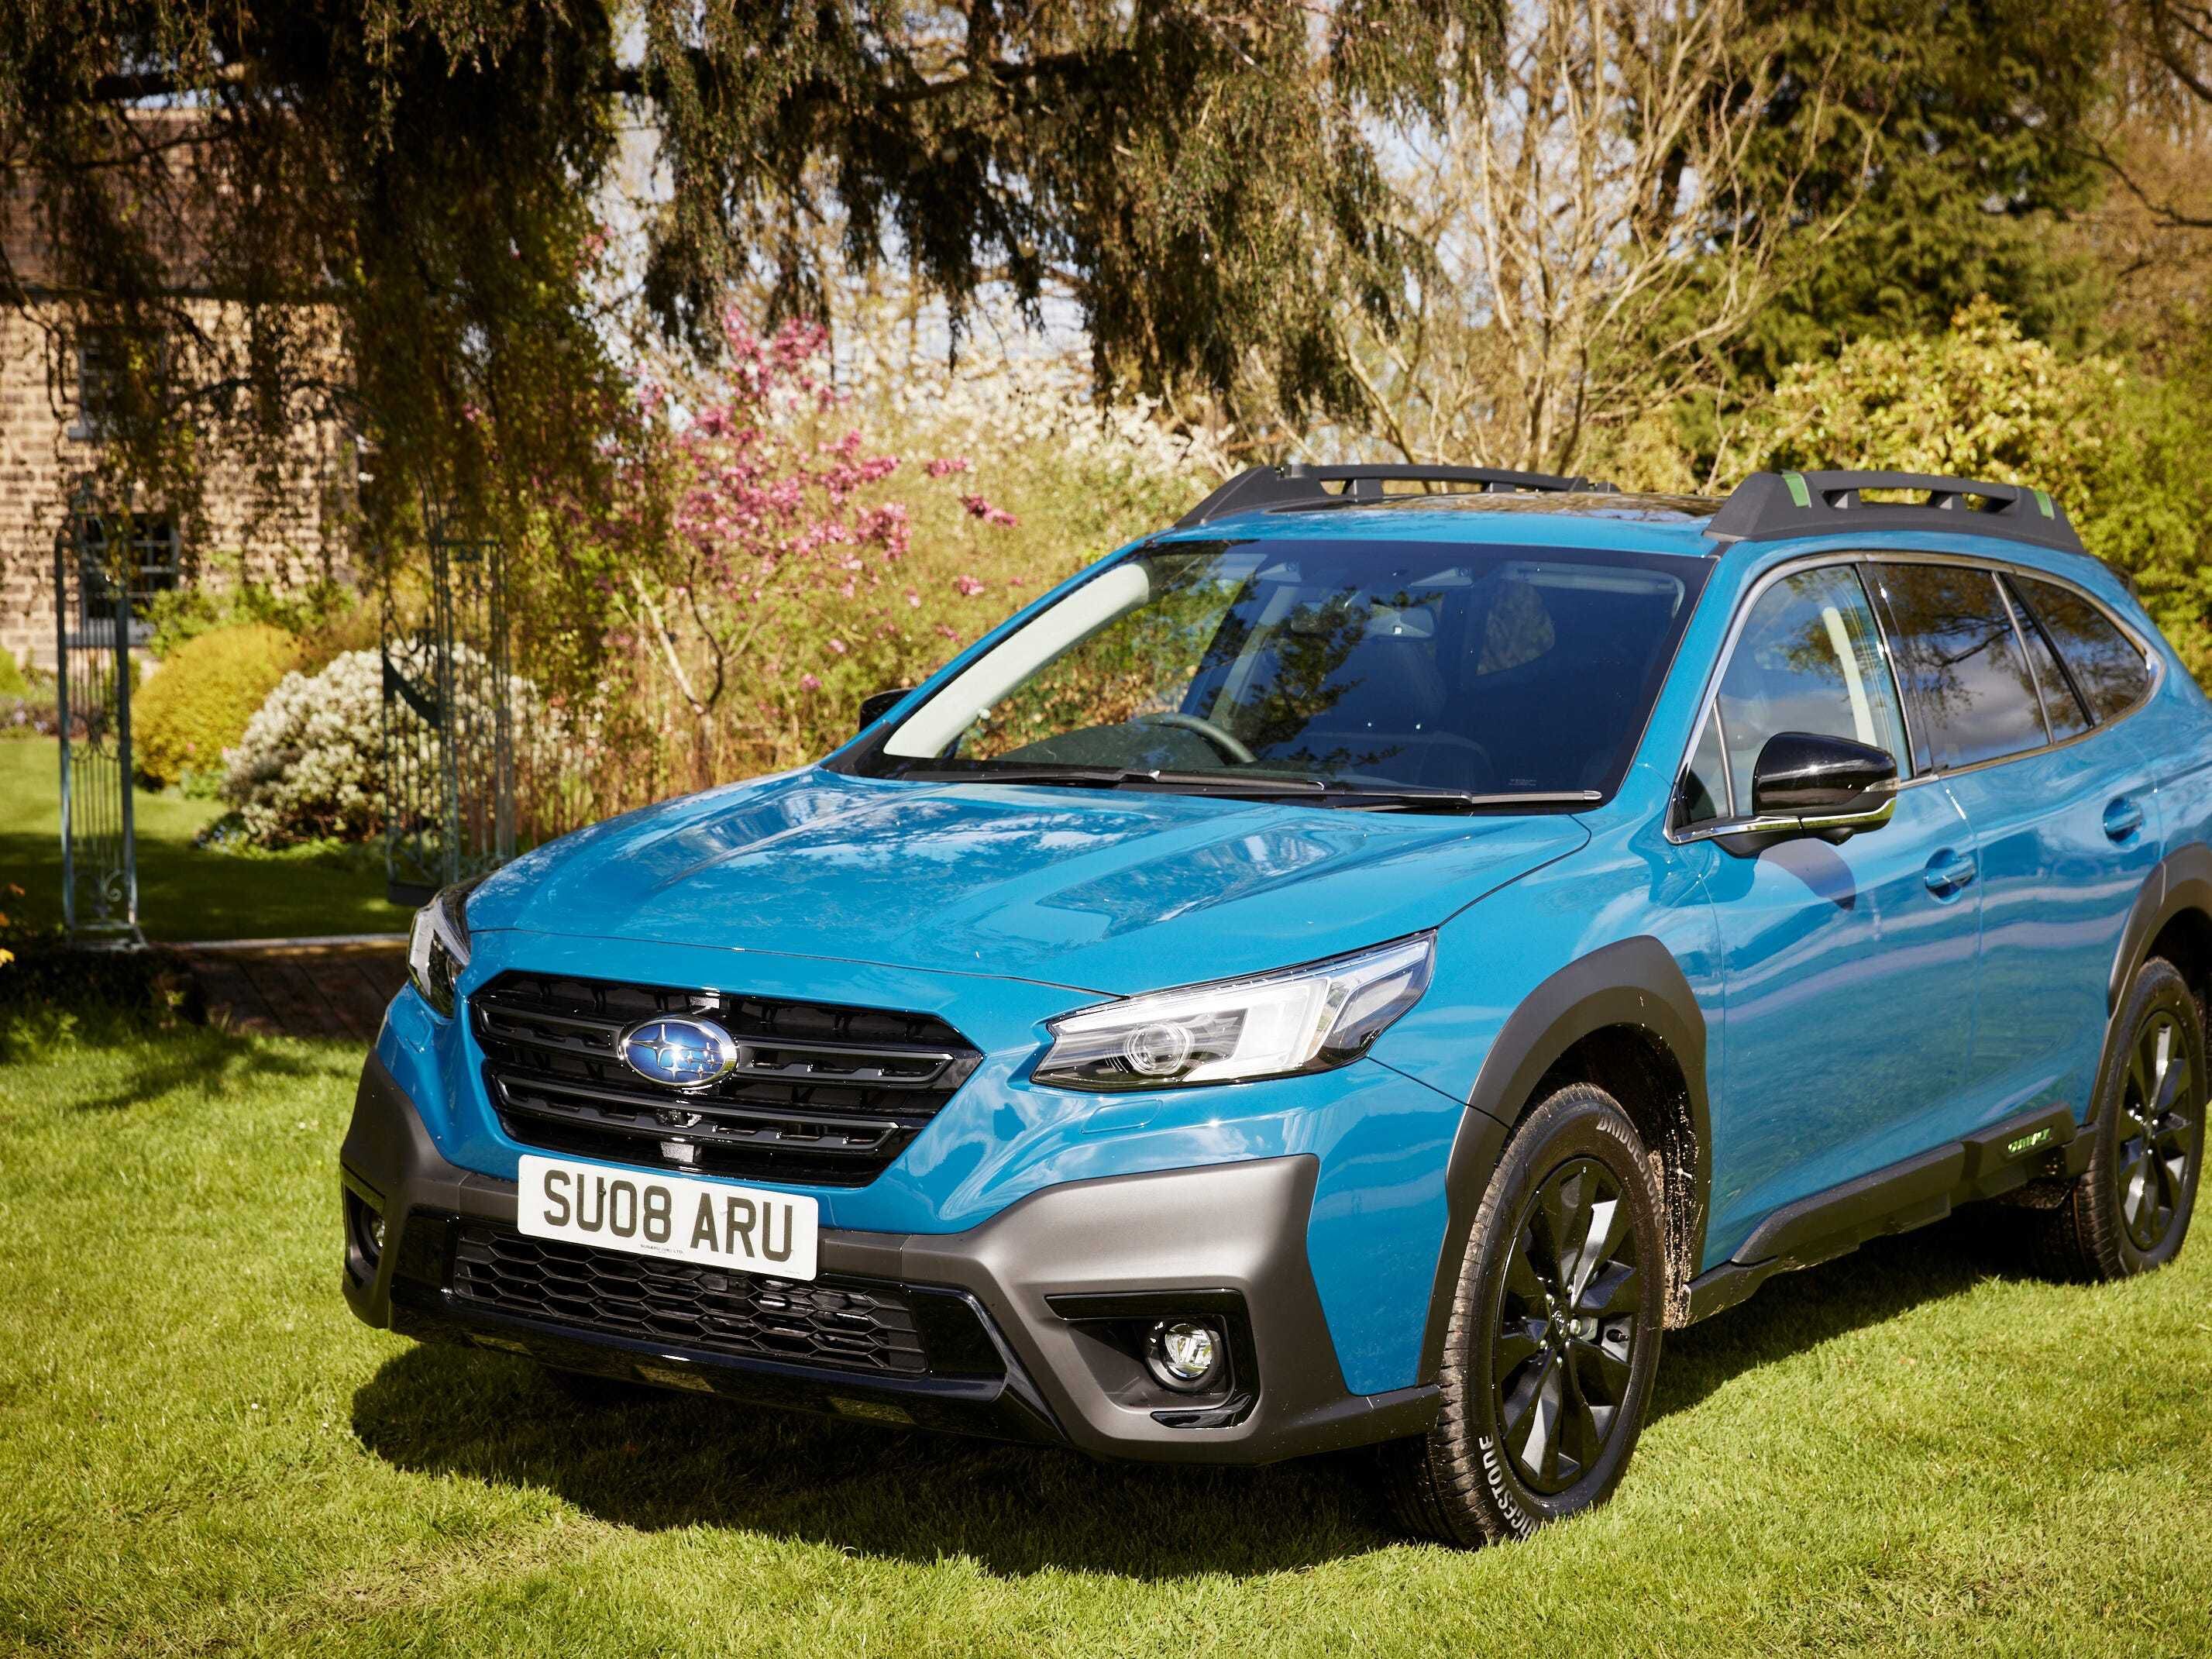 Subaru Outback Touring X will be limited to just 100 examples